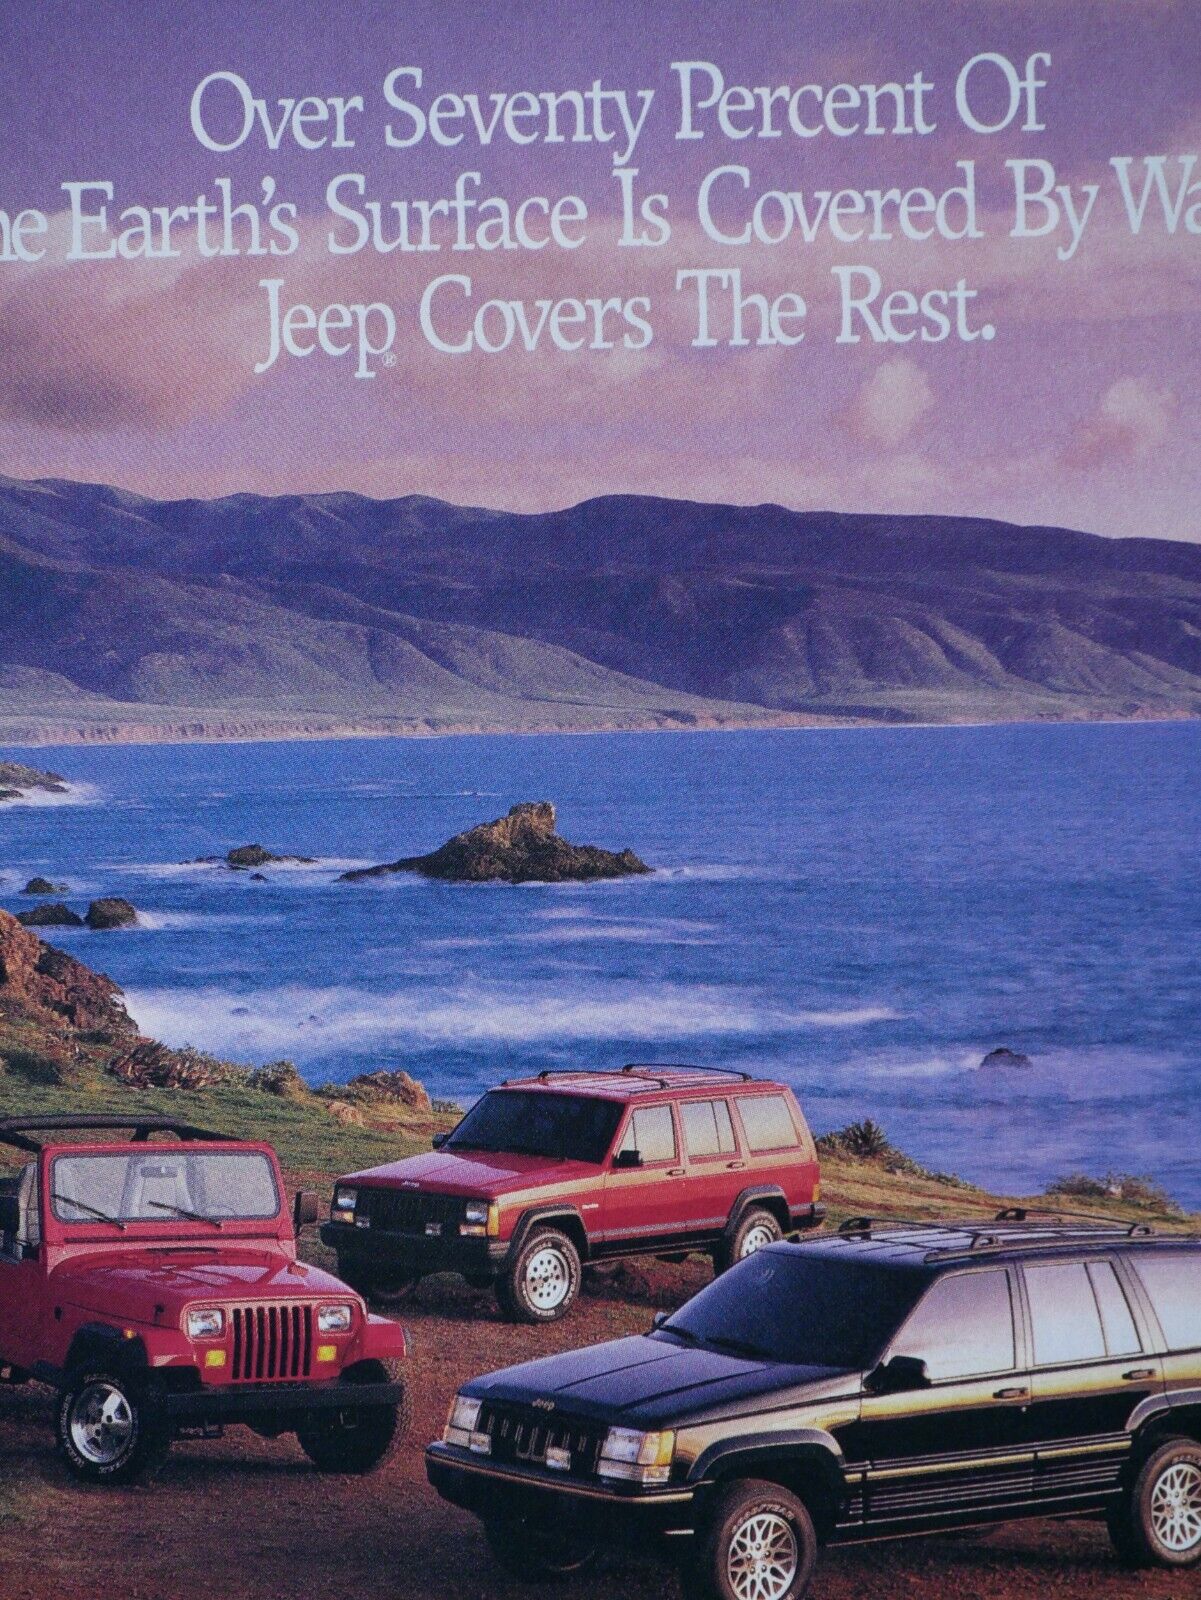 1993 Jeep Vintage Jeep Covers The World Original Print Ad-8.5 x 11\